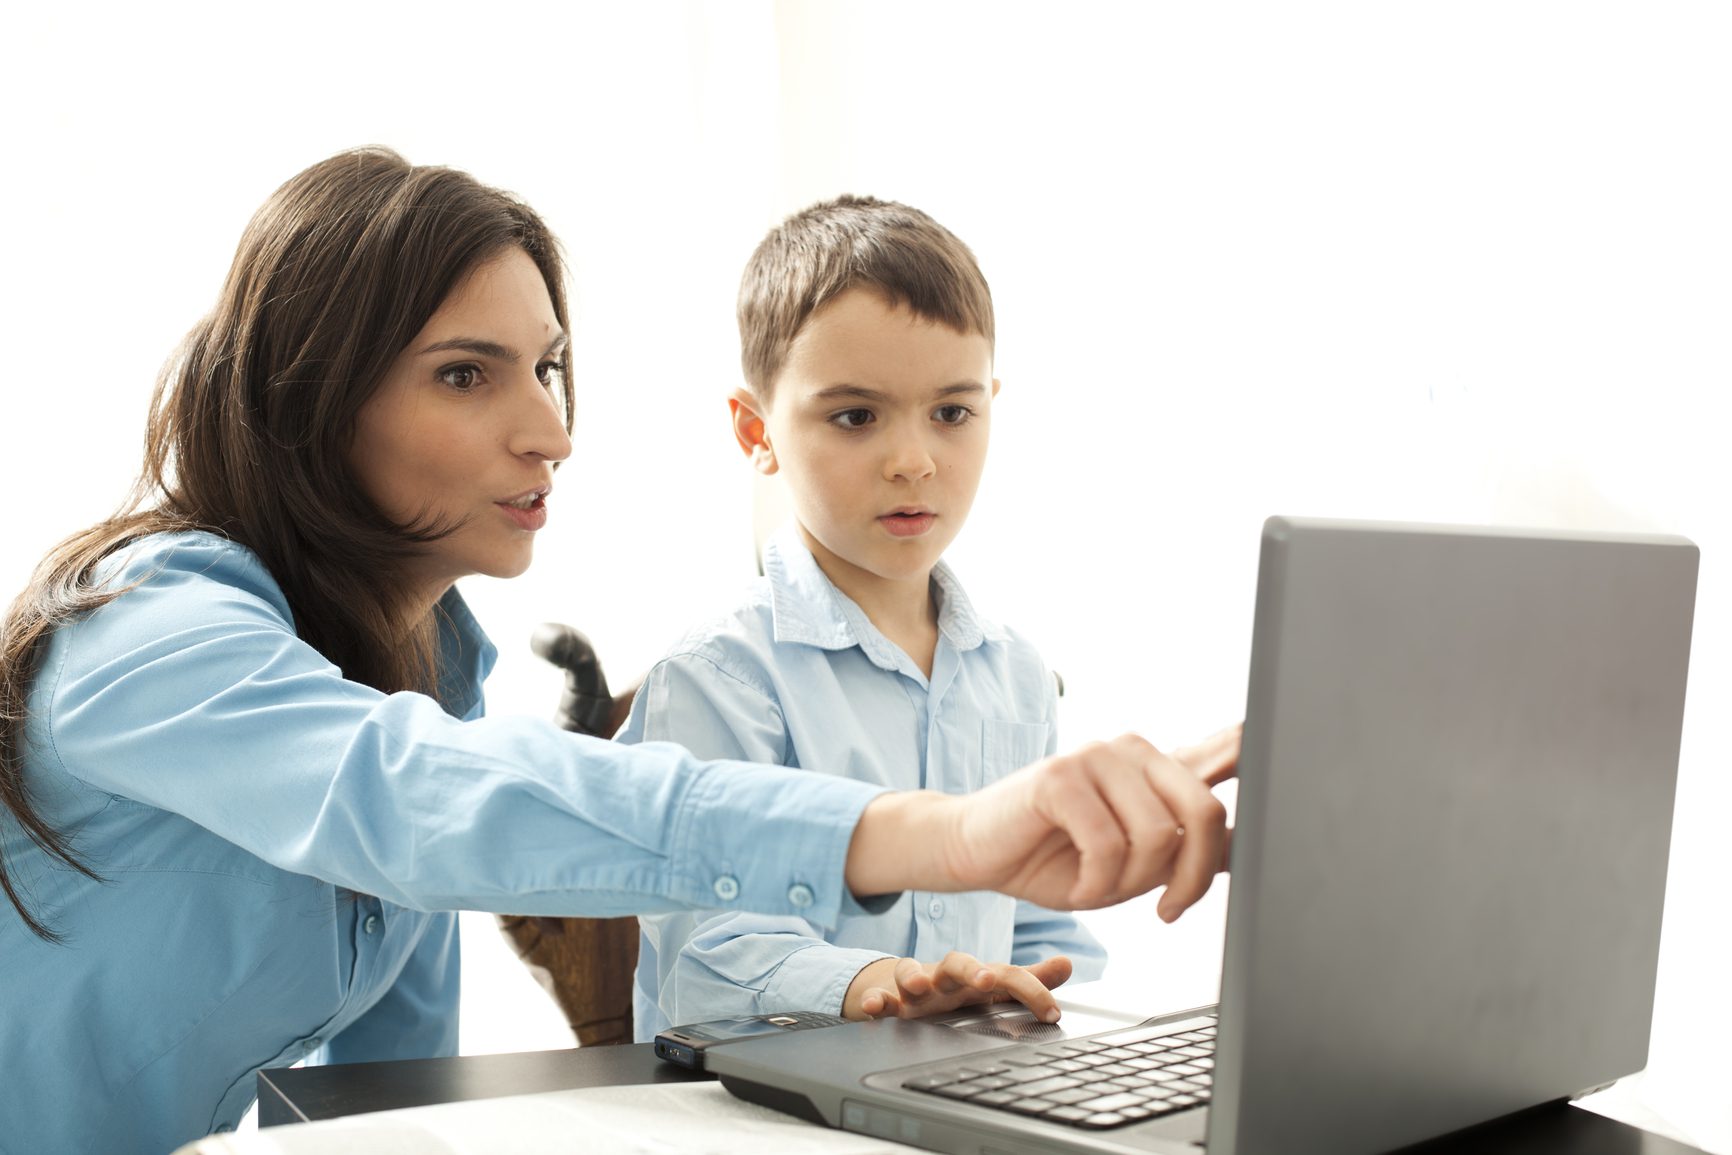 boy leaning to use computer